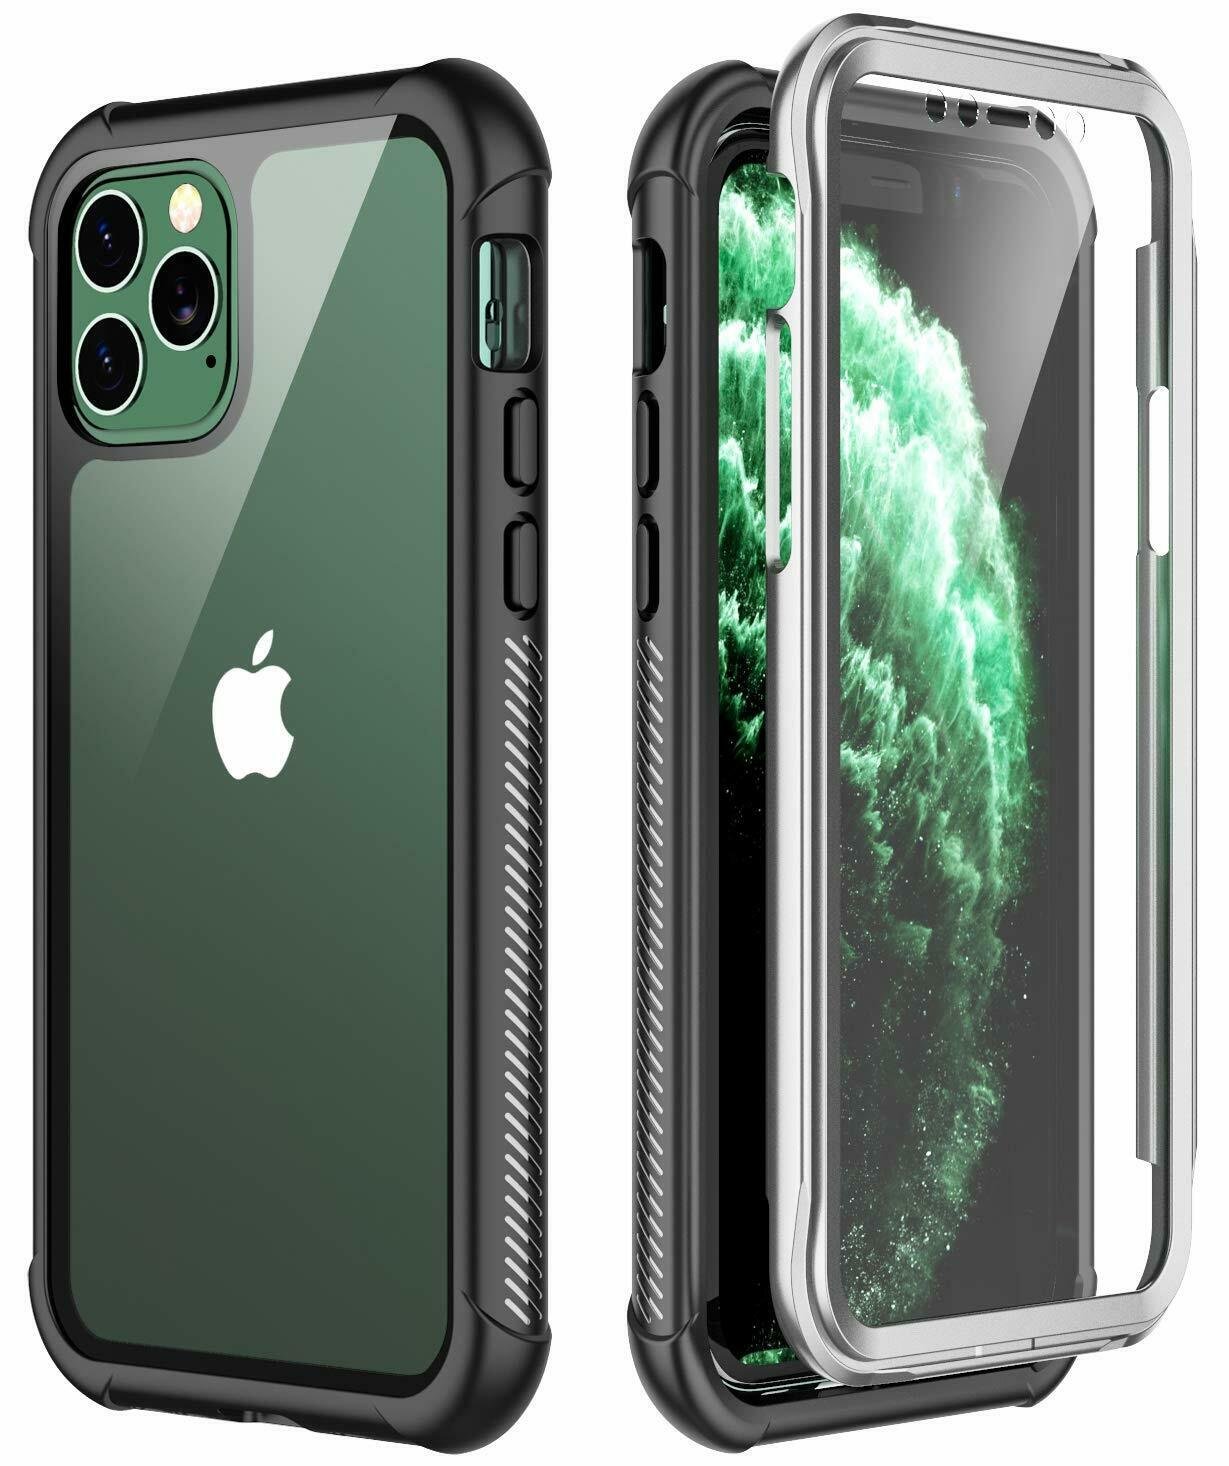 iphone 11 pro max case size